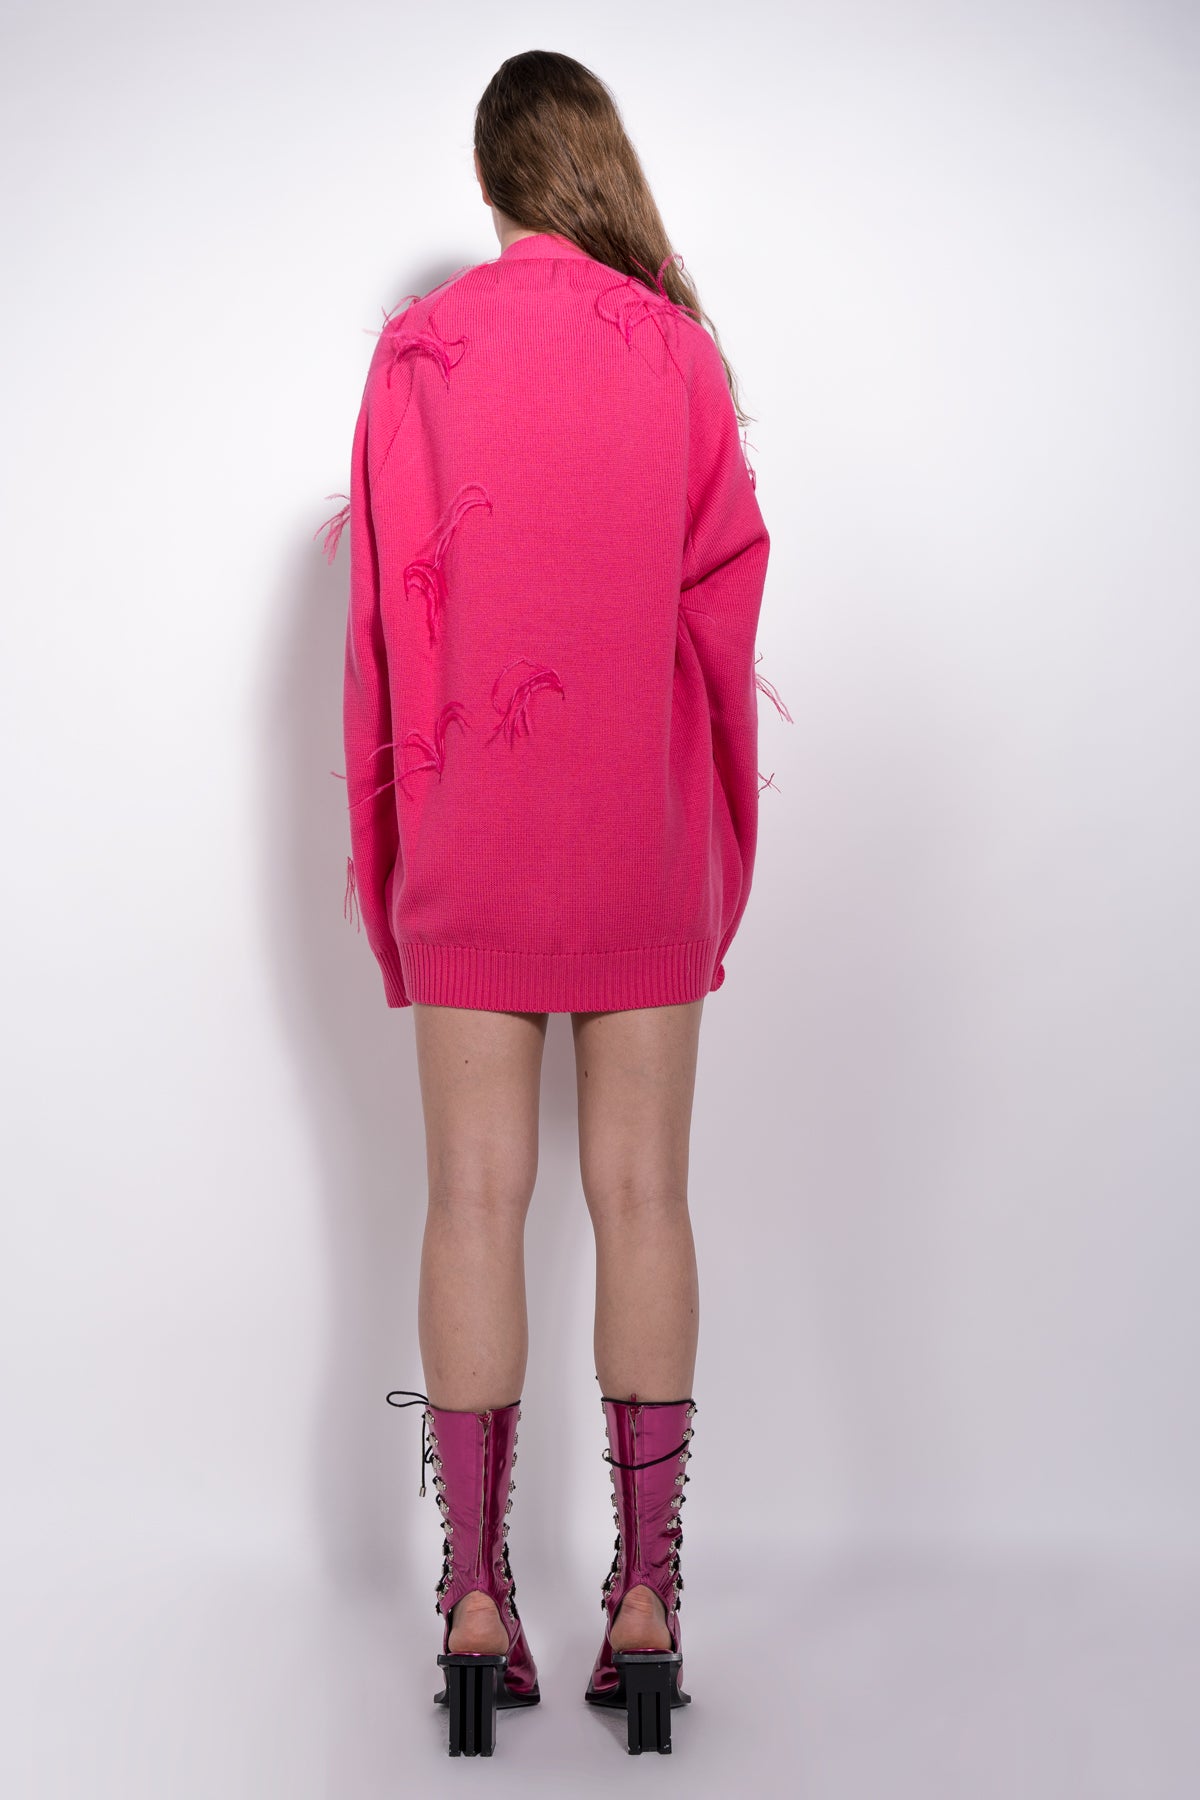 PINK OVERSIZED CARDIGAN WITH FEATHERS marques almeida.